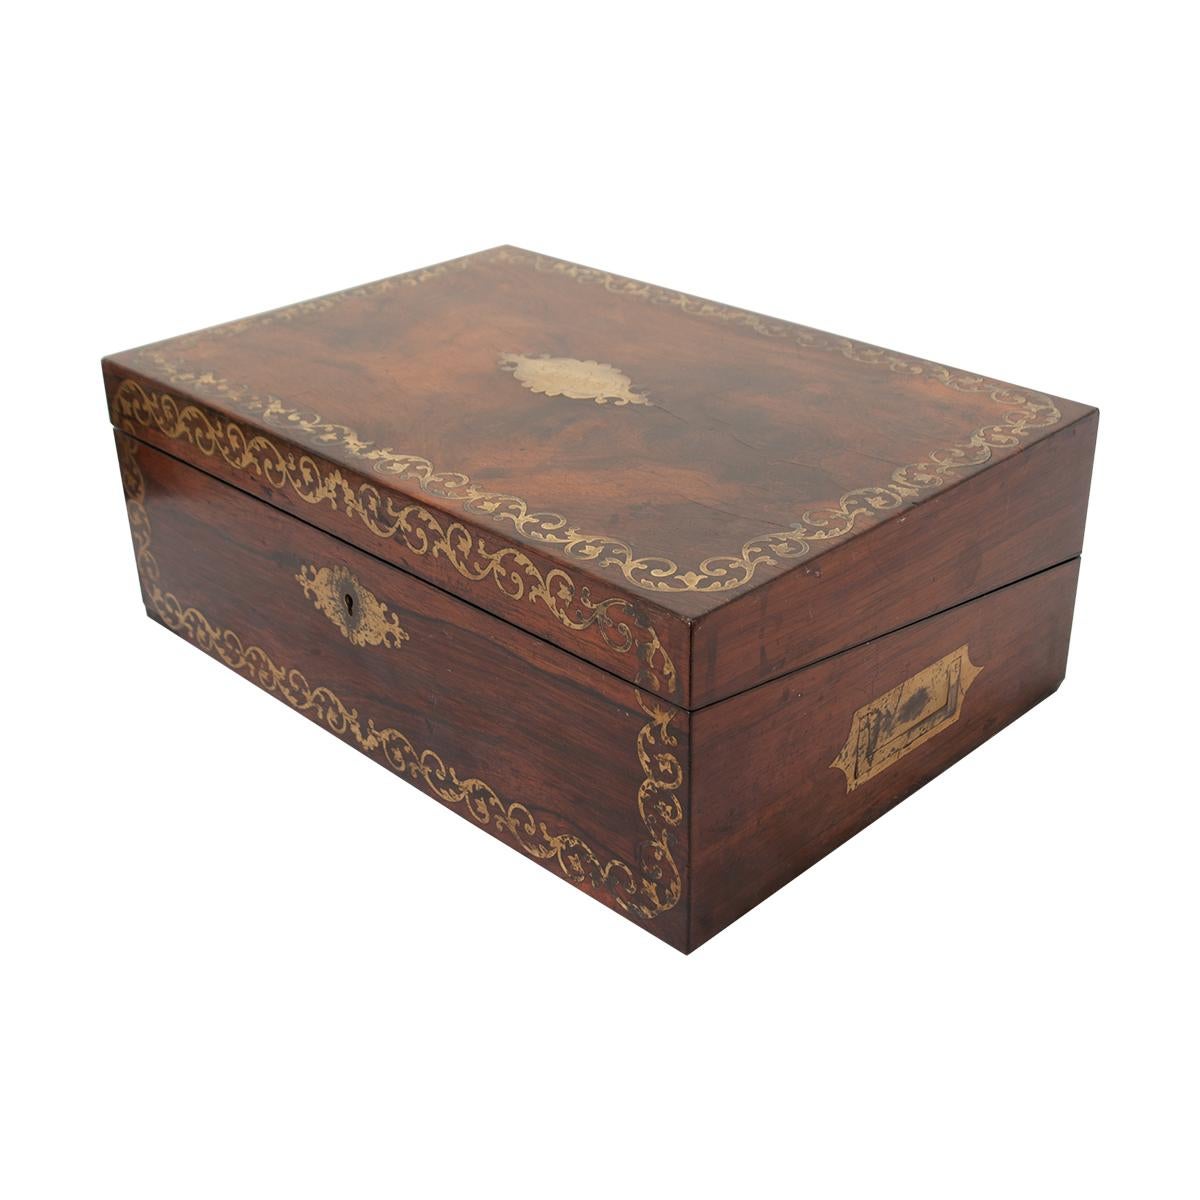 19th Century English Rosewood & Mother of Pearl Jewelry Box